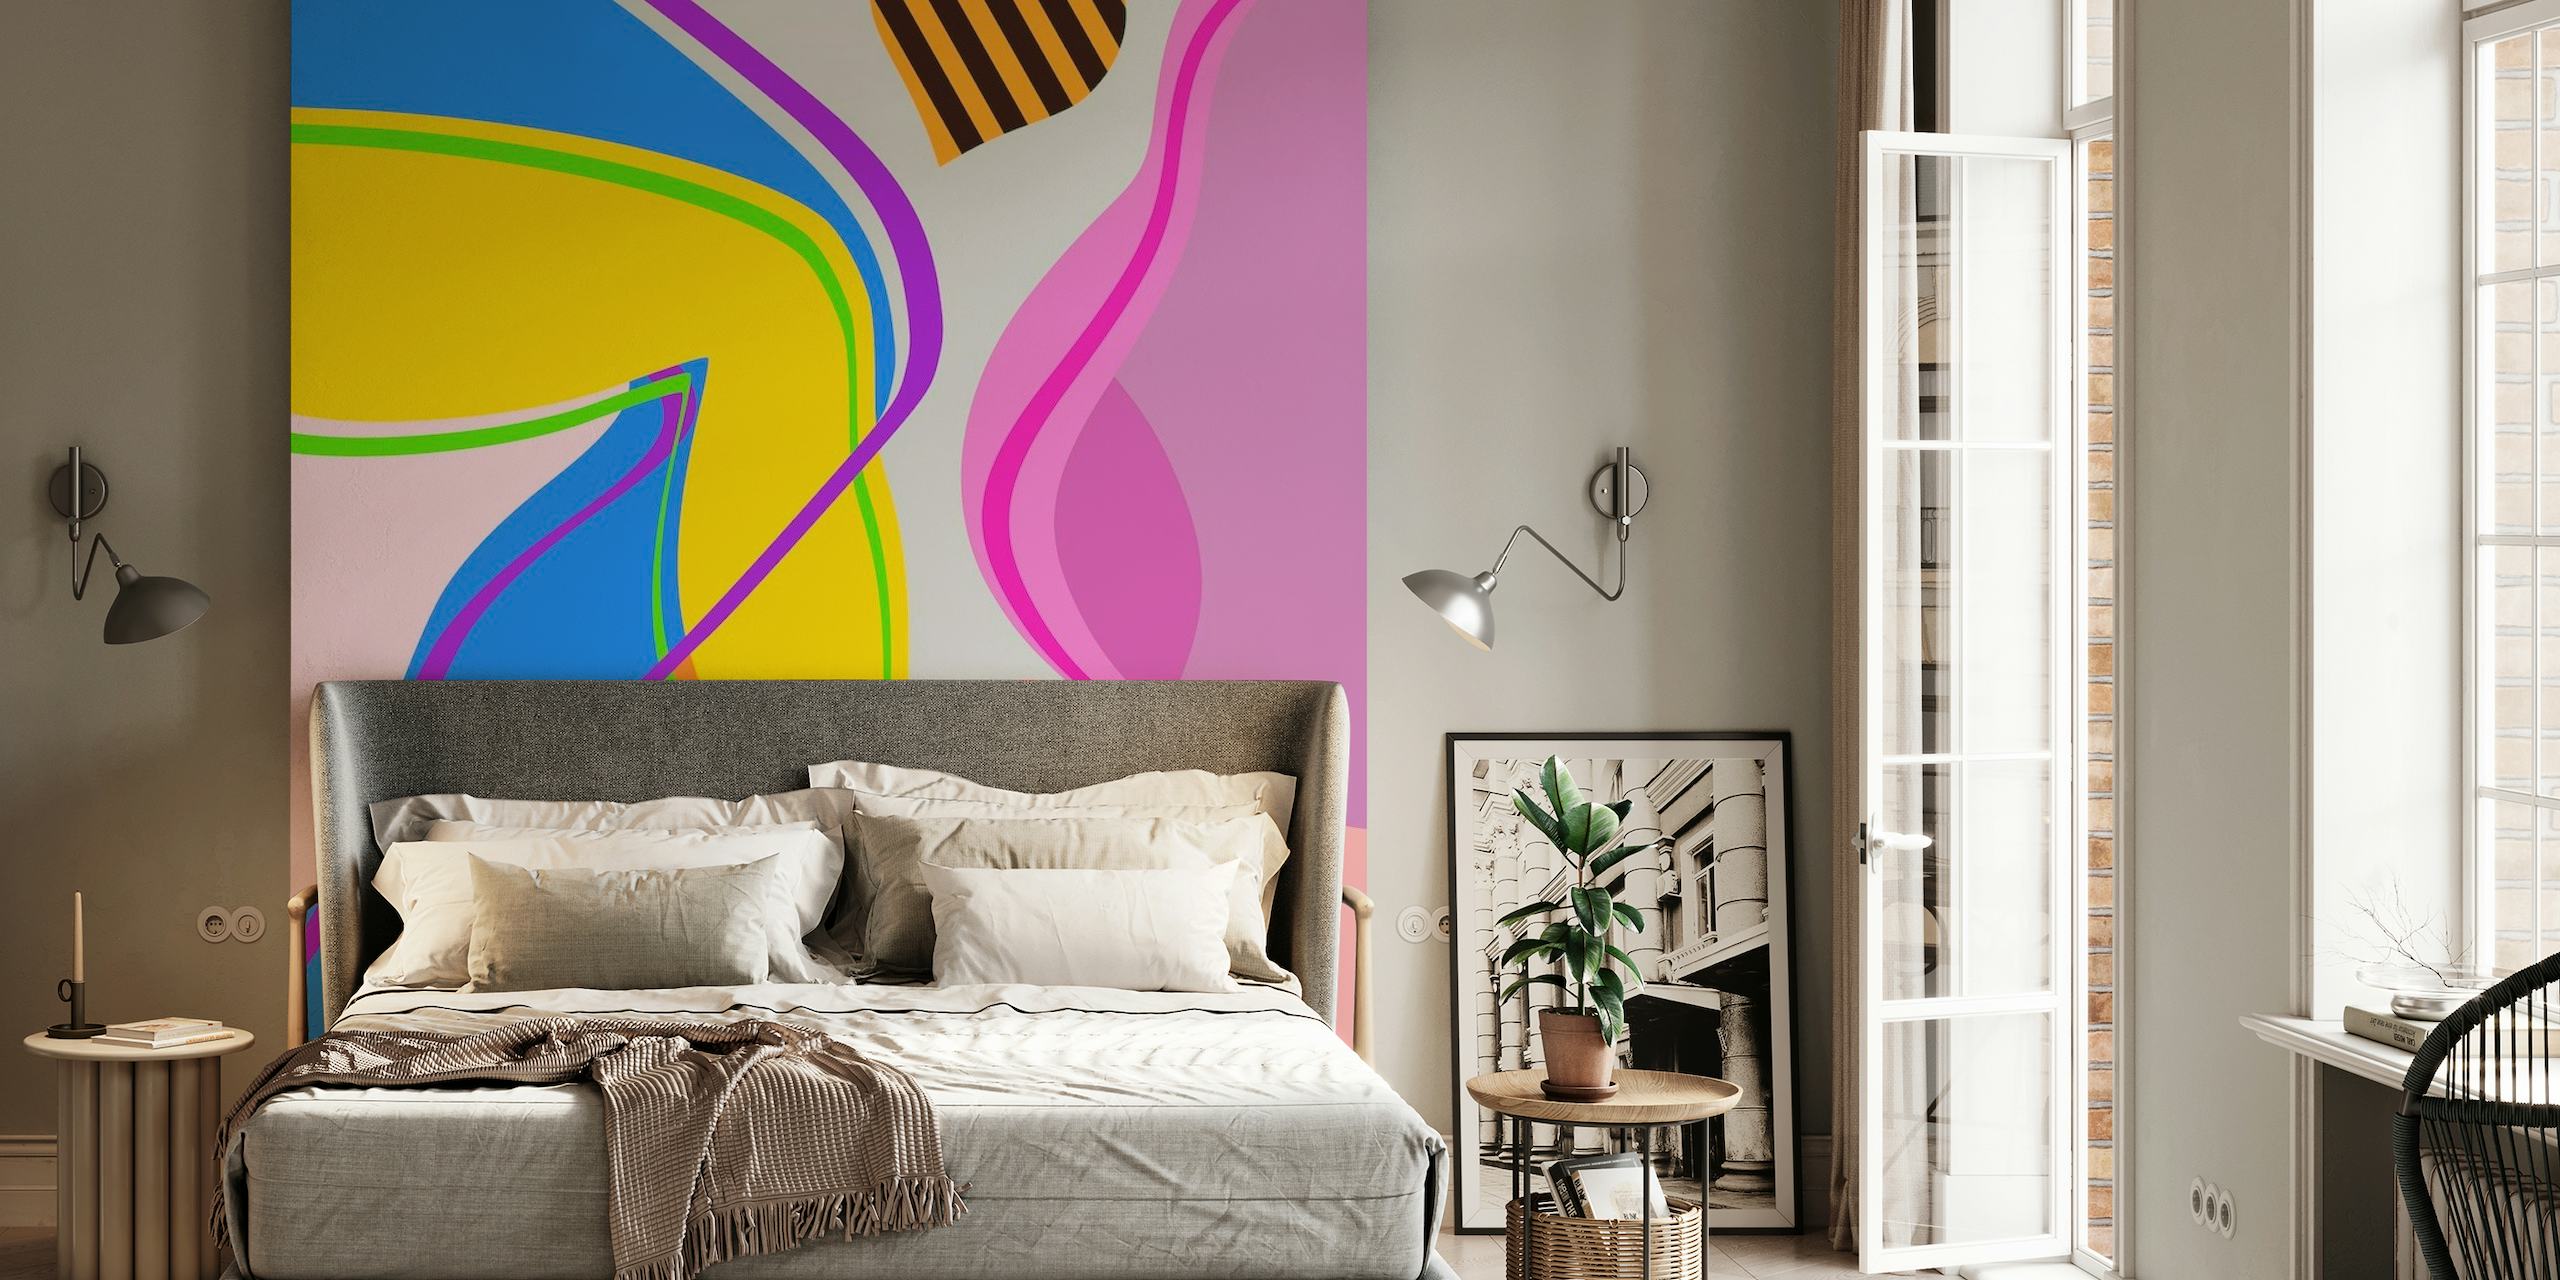 Abstract colorful wall mural with artistic representation of a woman's silhouette